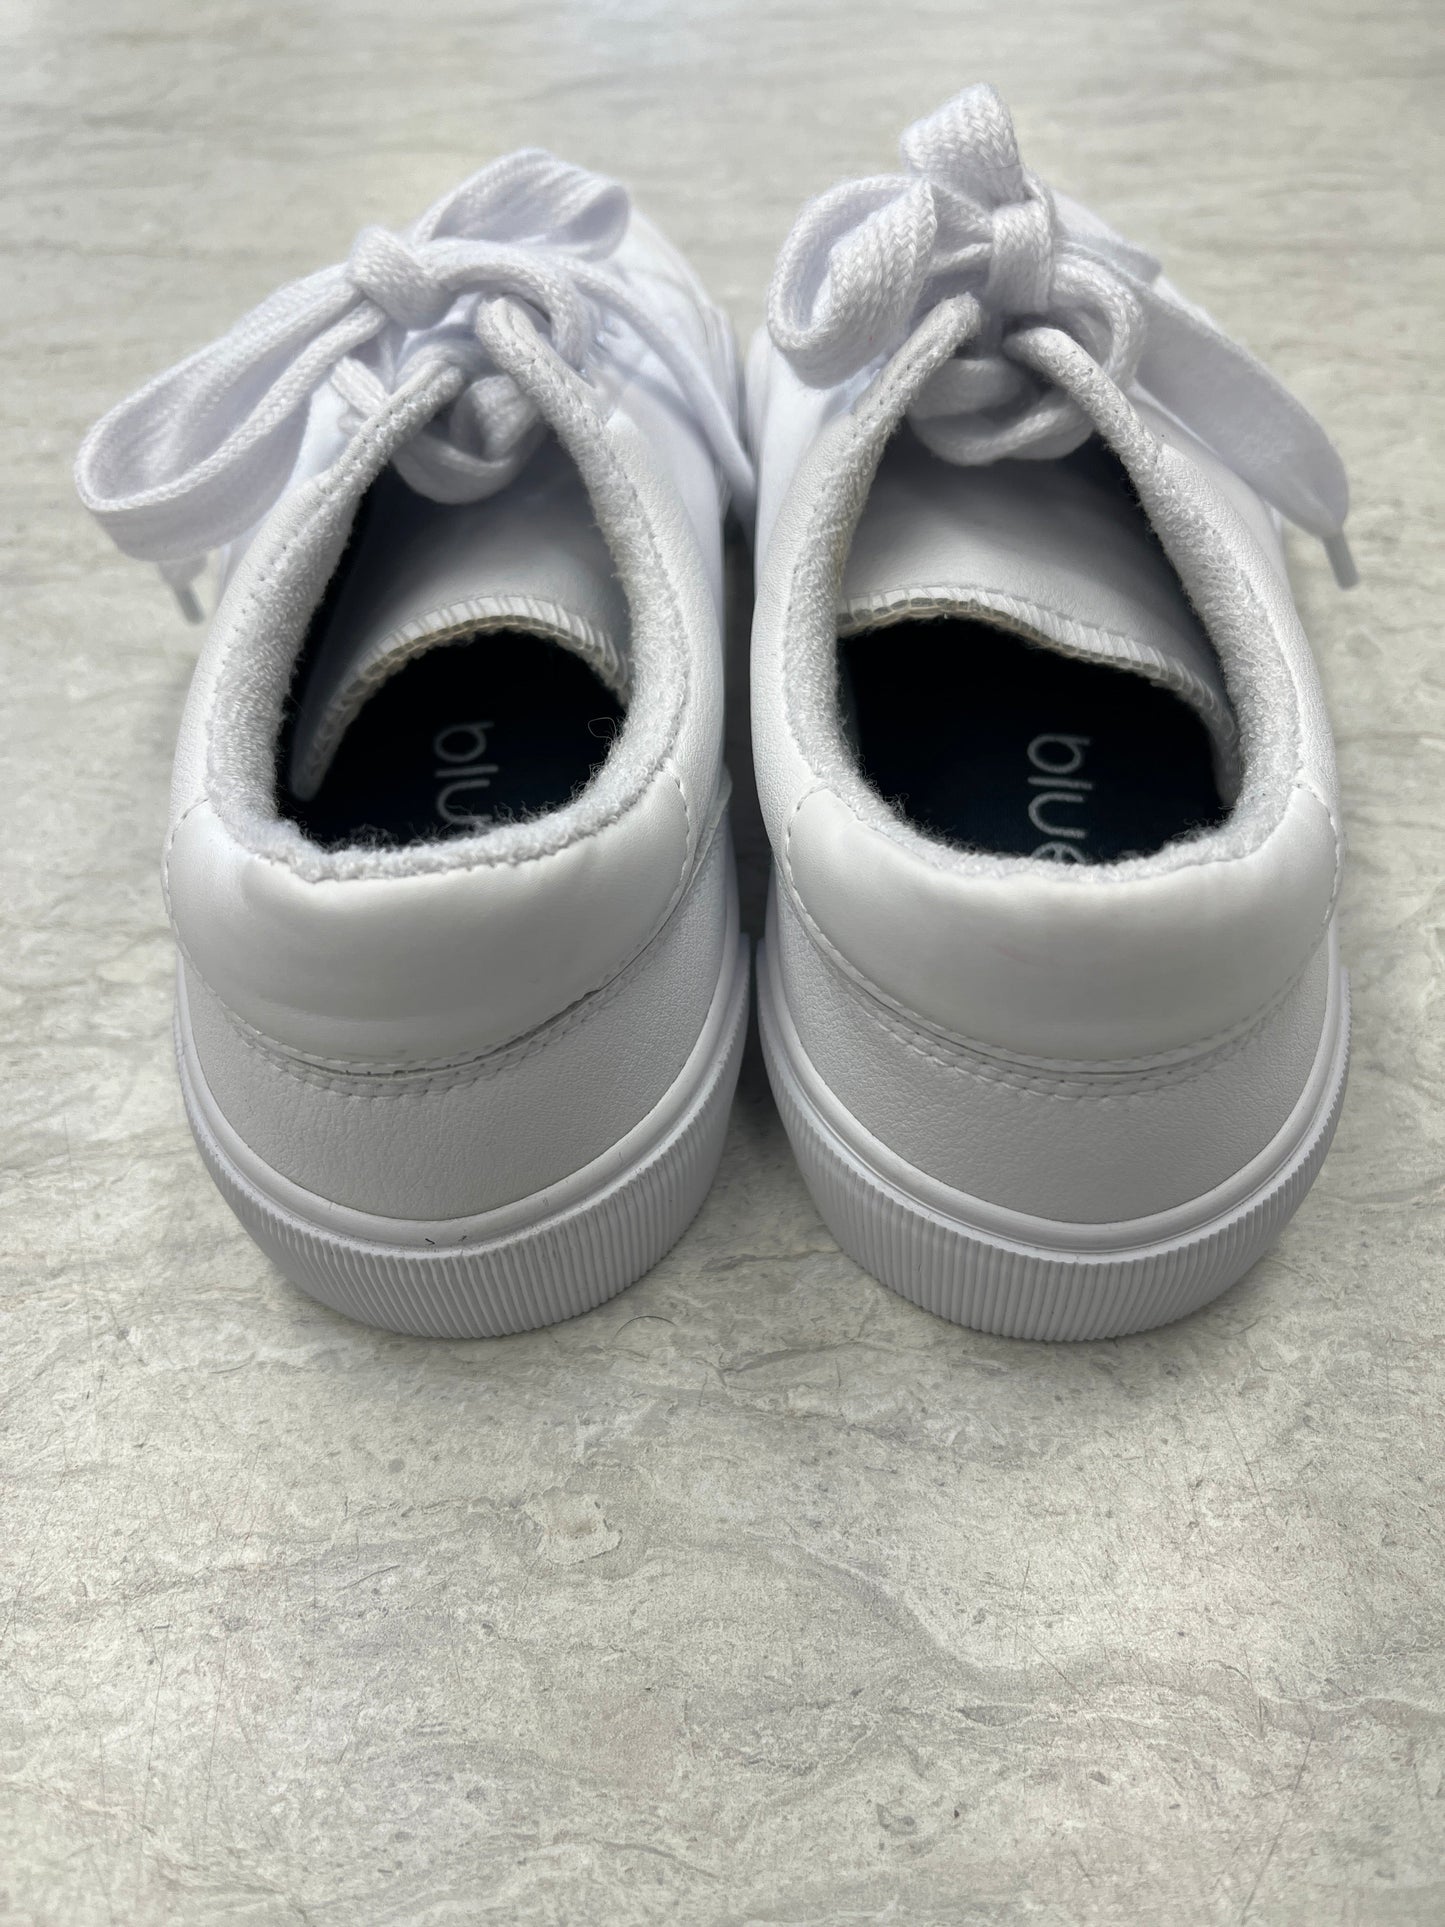 White Shoes Sneakers Clothes Mentor, Size 7